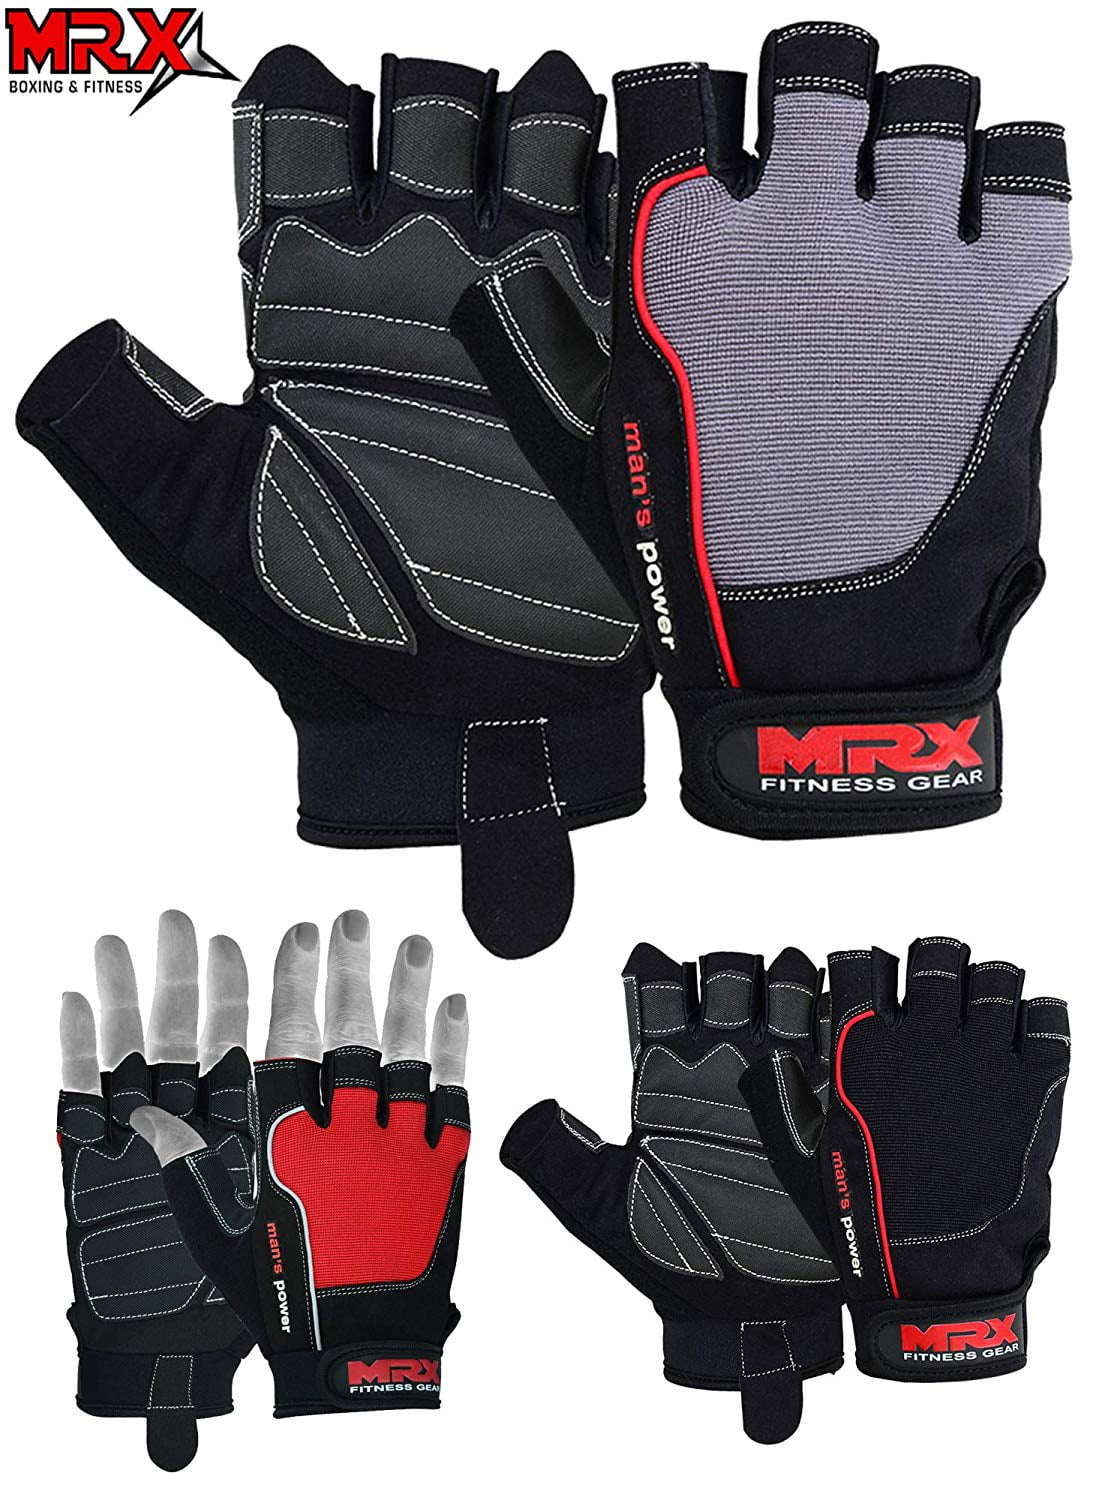 MRX Weightlifting Gloves for Men and Women Gym Workout Training Crossfit 